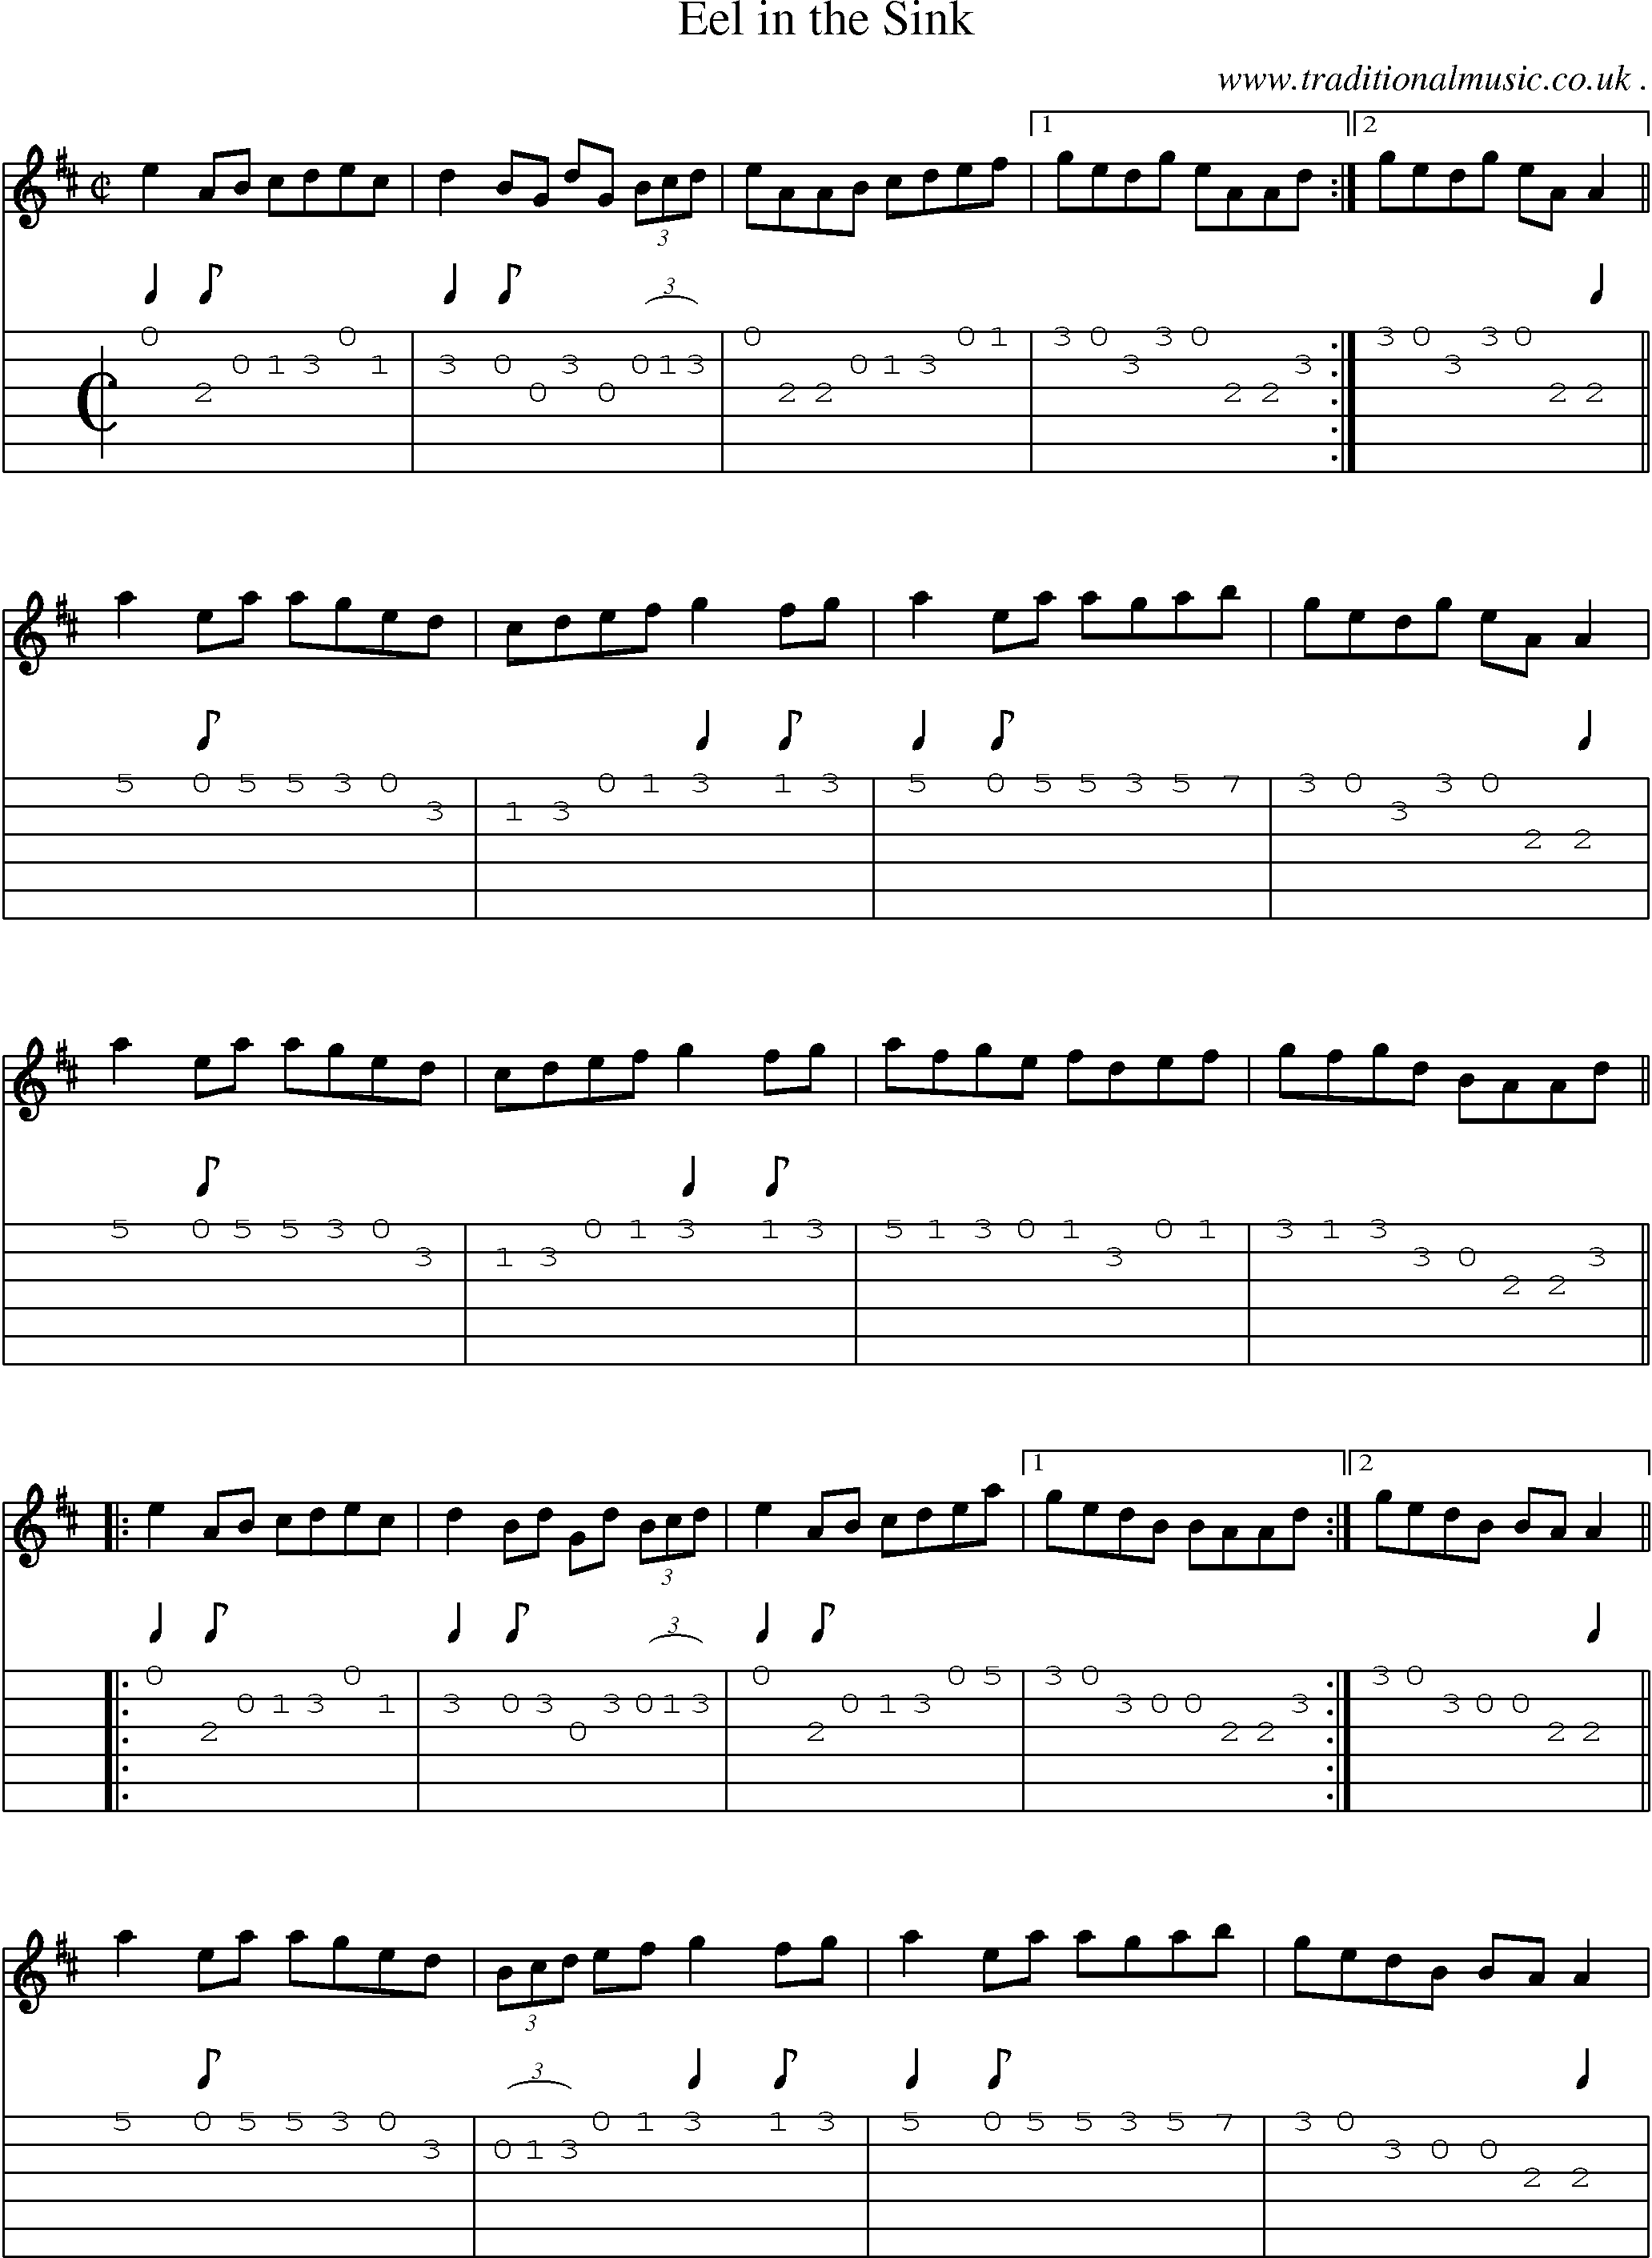 Sheet-Music and Guitar Tabs for Eel In The Sink